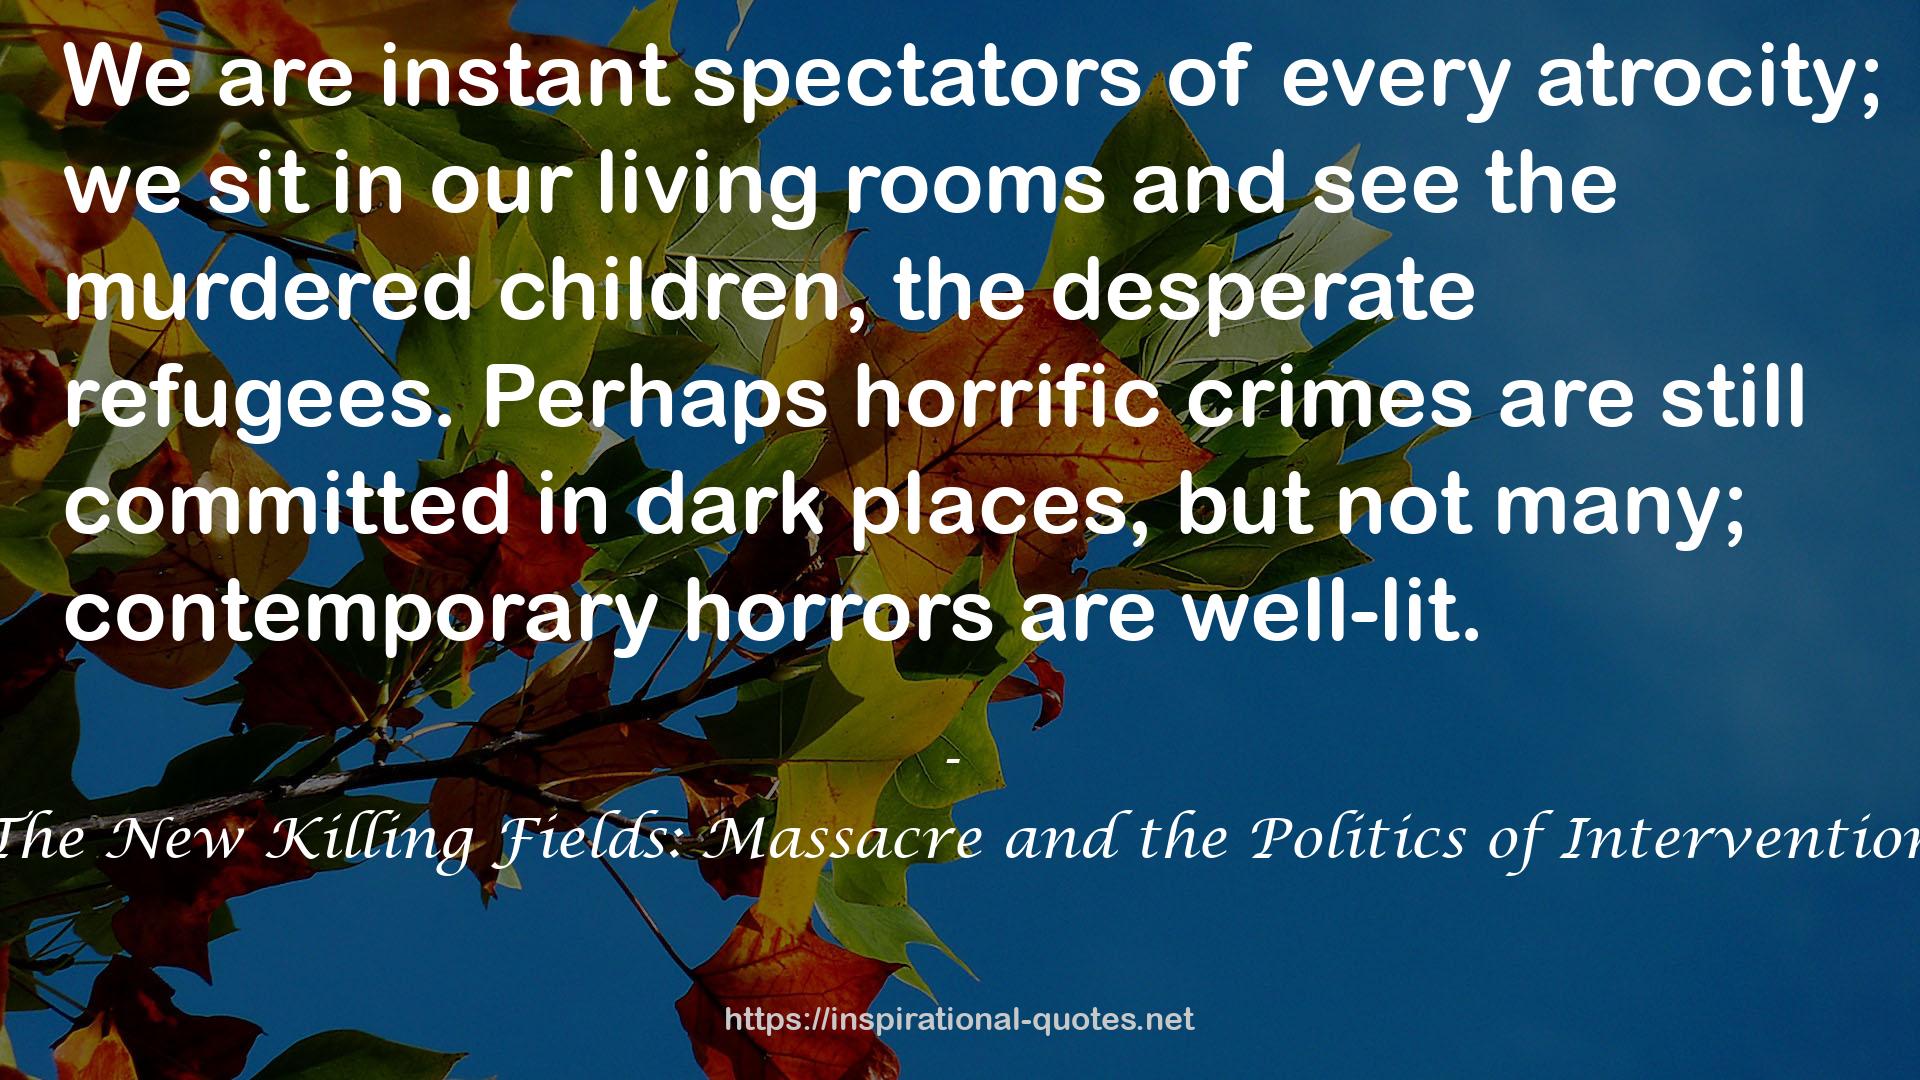 The New Killing Fields: Massacre and the Politics of Intervention QUOTES